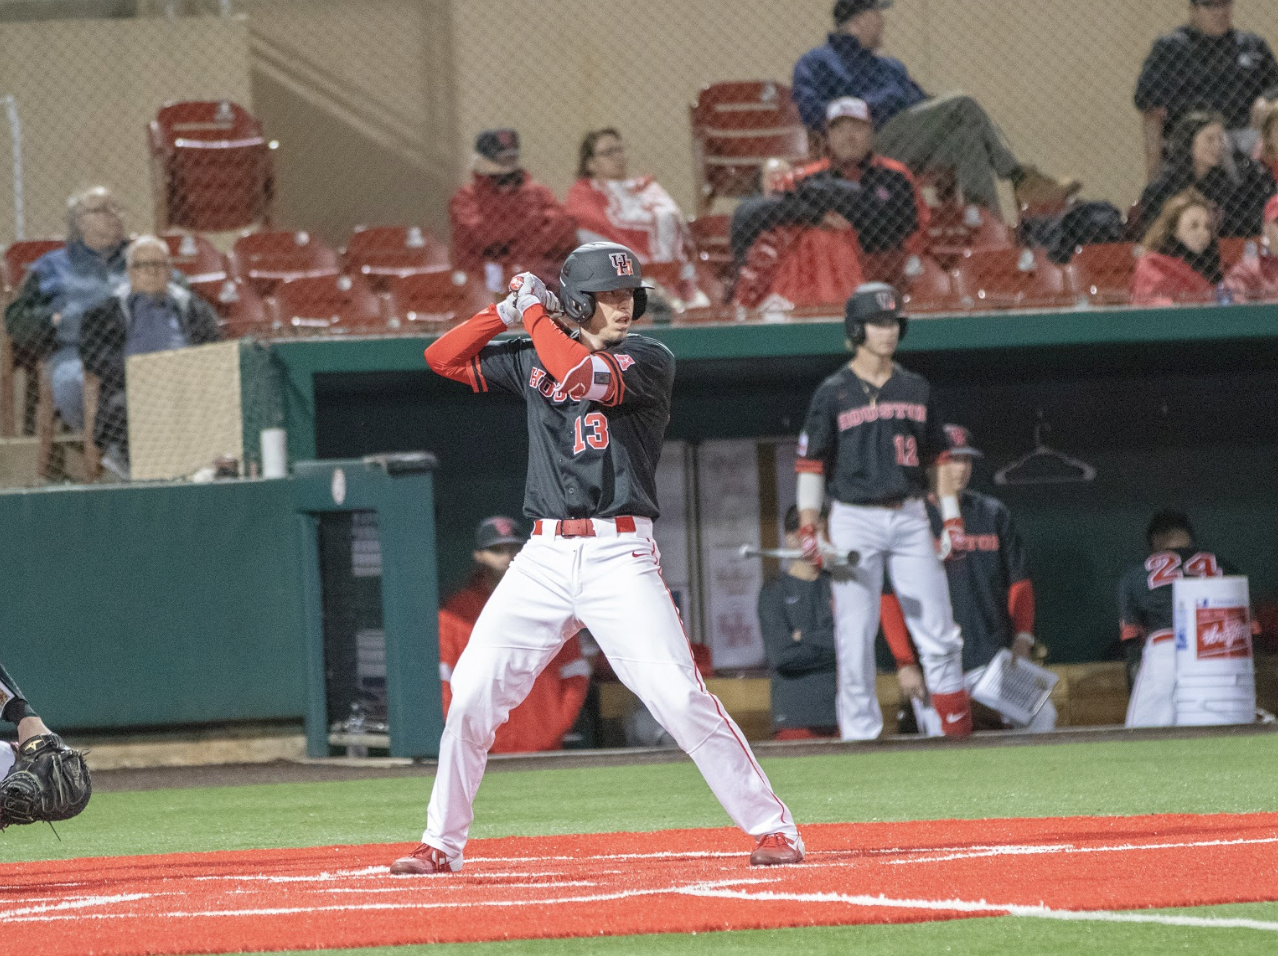 Senior outfielder Tyler Bielamowicz tallied three hits and three RBIs to propel the Cougars to a 6-4 win Wednesday night at Rice in the first game of 2020's Silver Glove Series. | Jhair Romero/The Cougar